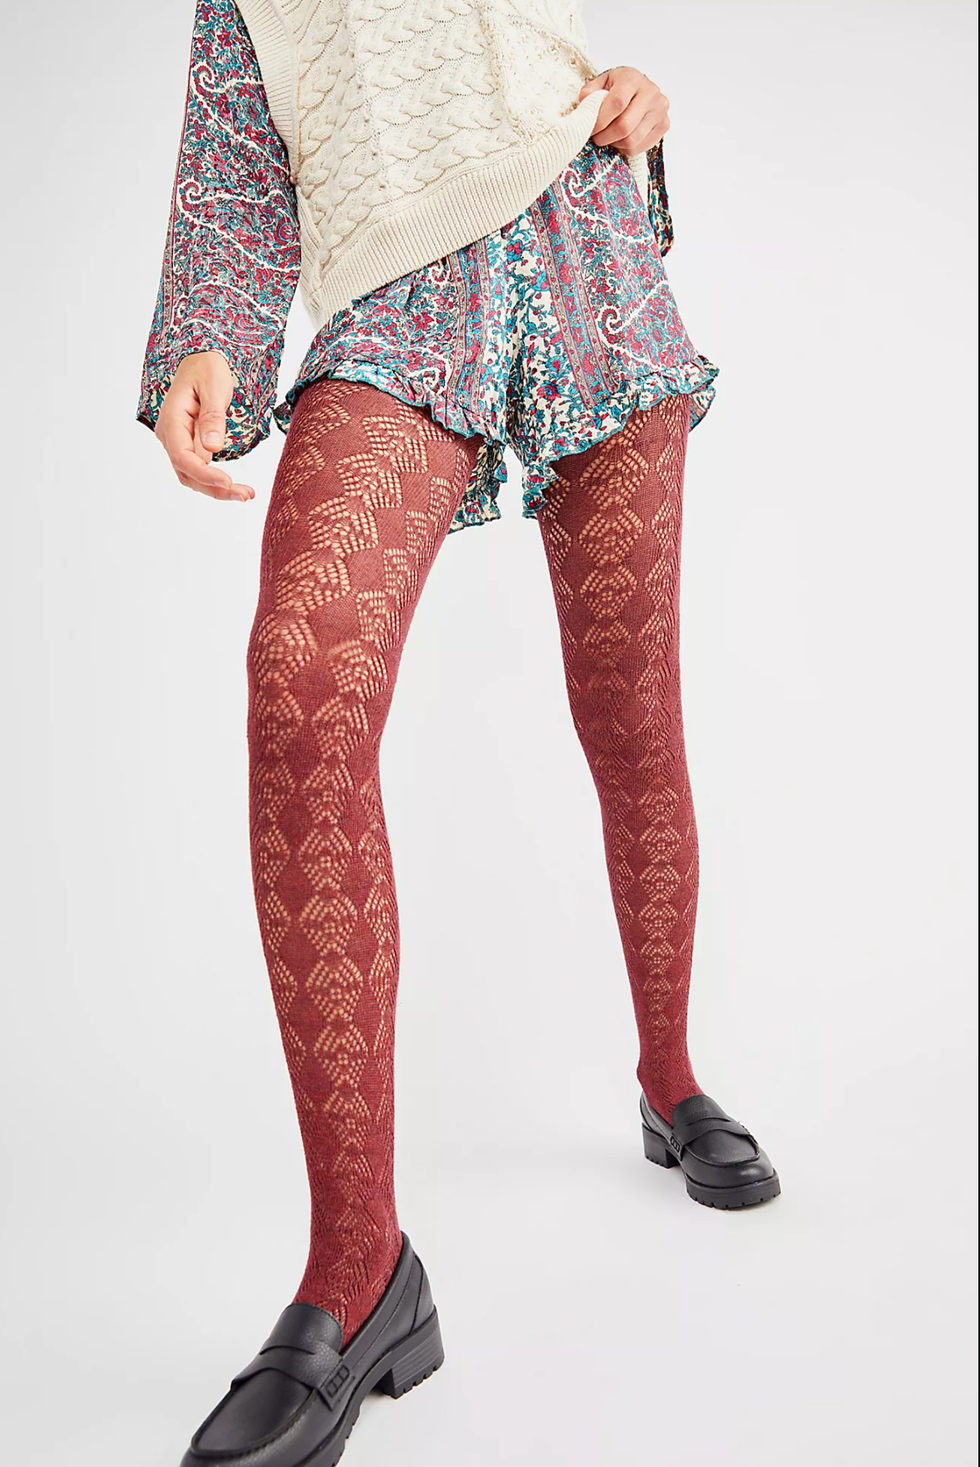 Floral or Less Pattern Tights